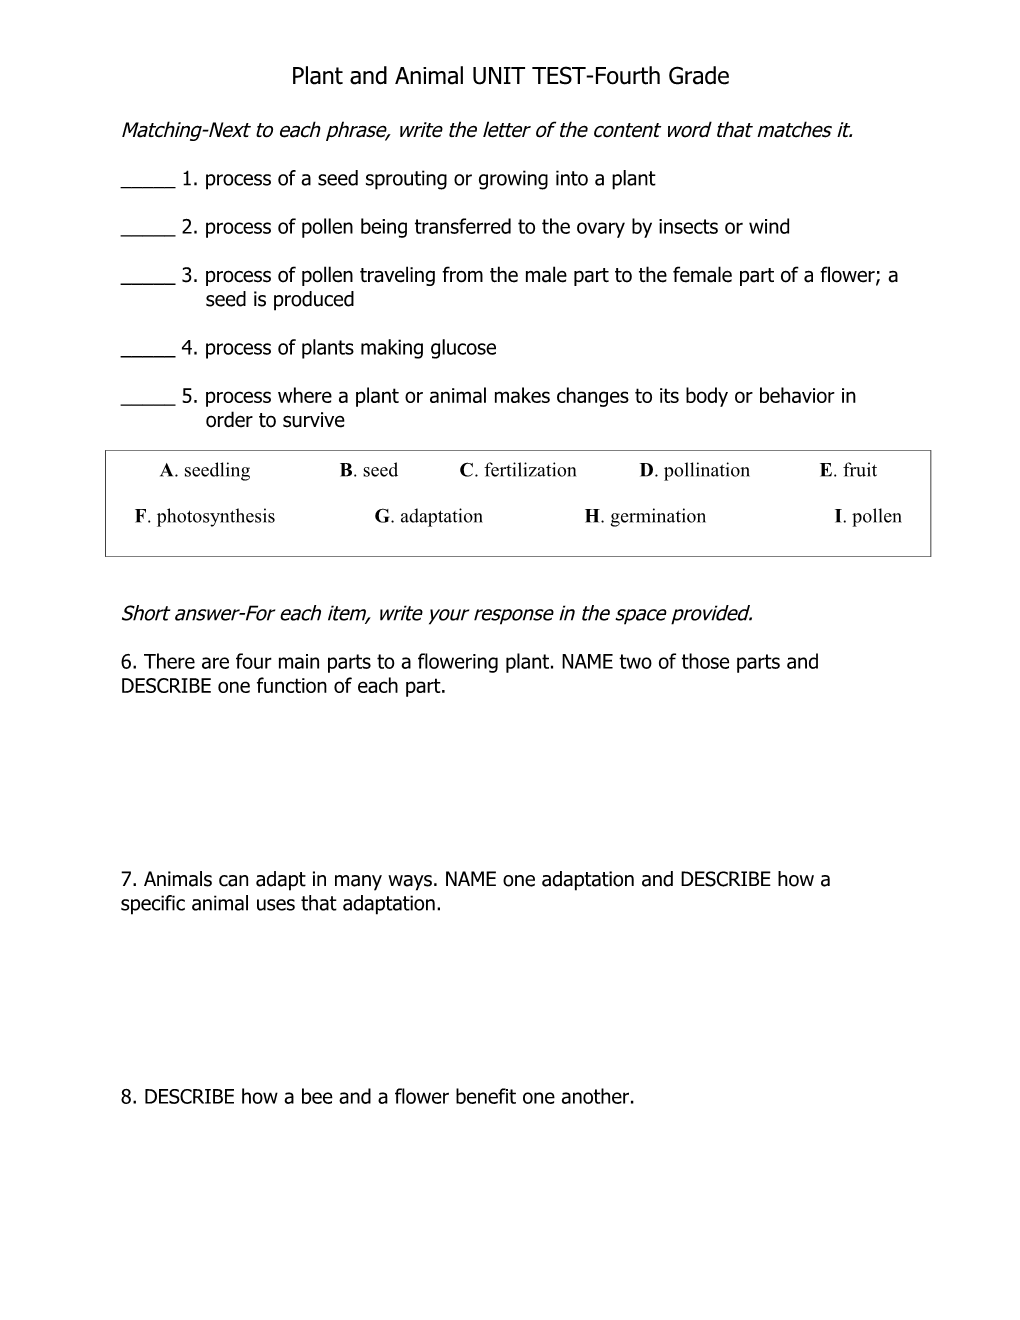 Plant and Animal UNIT TEST-Fourth Grade